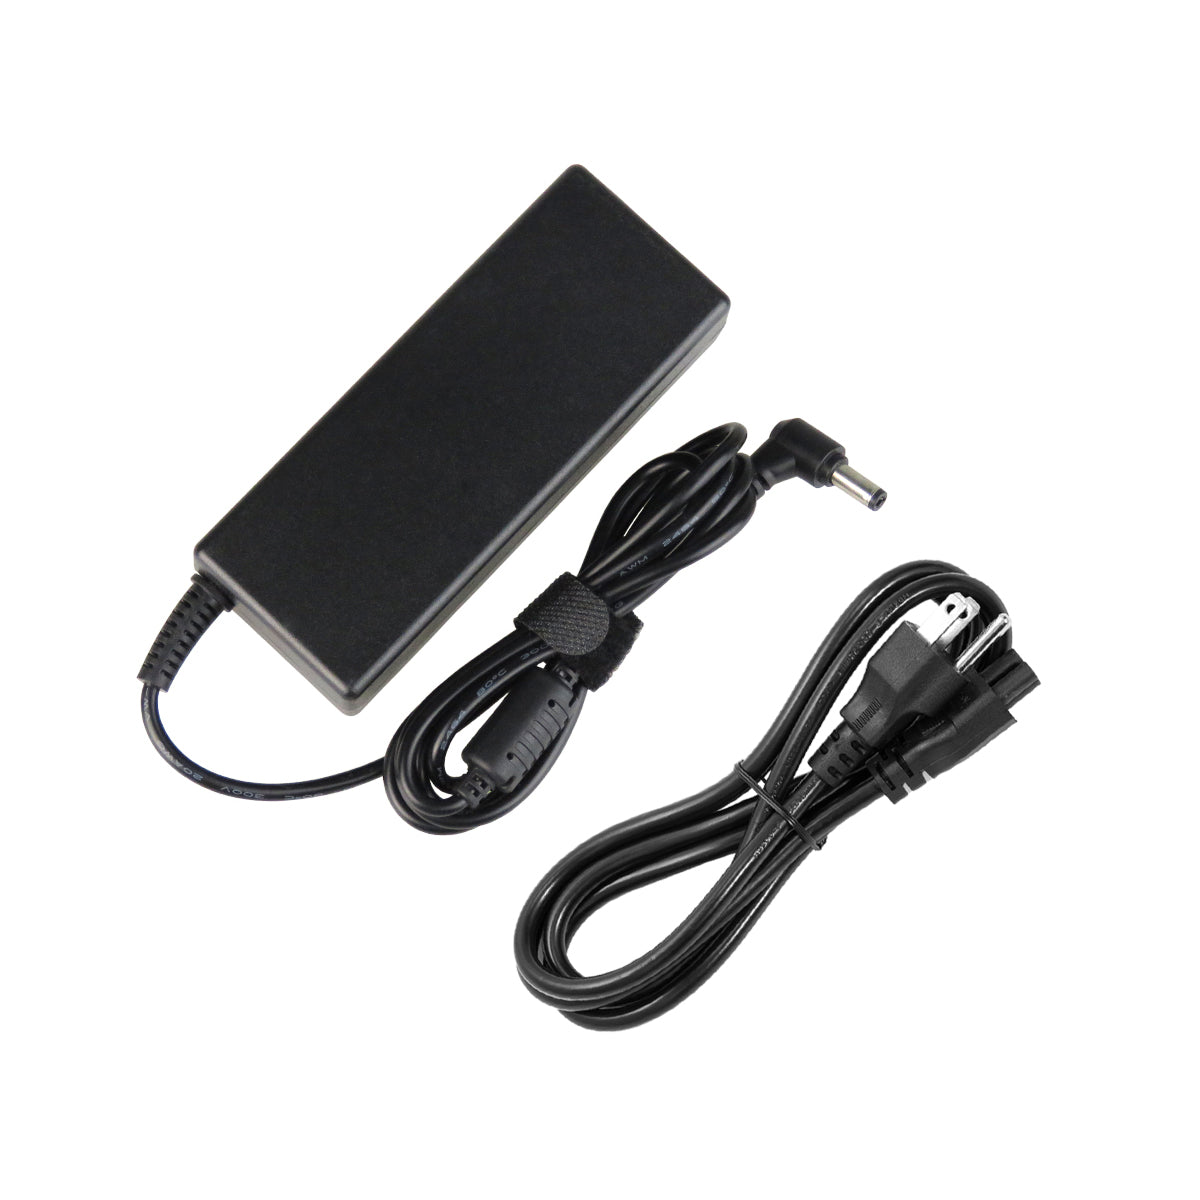 AC Adapter Charger for ASUS X54C-NS92 Notebook.